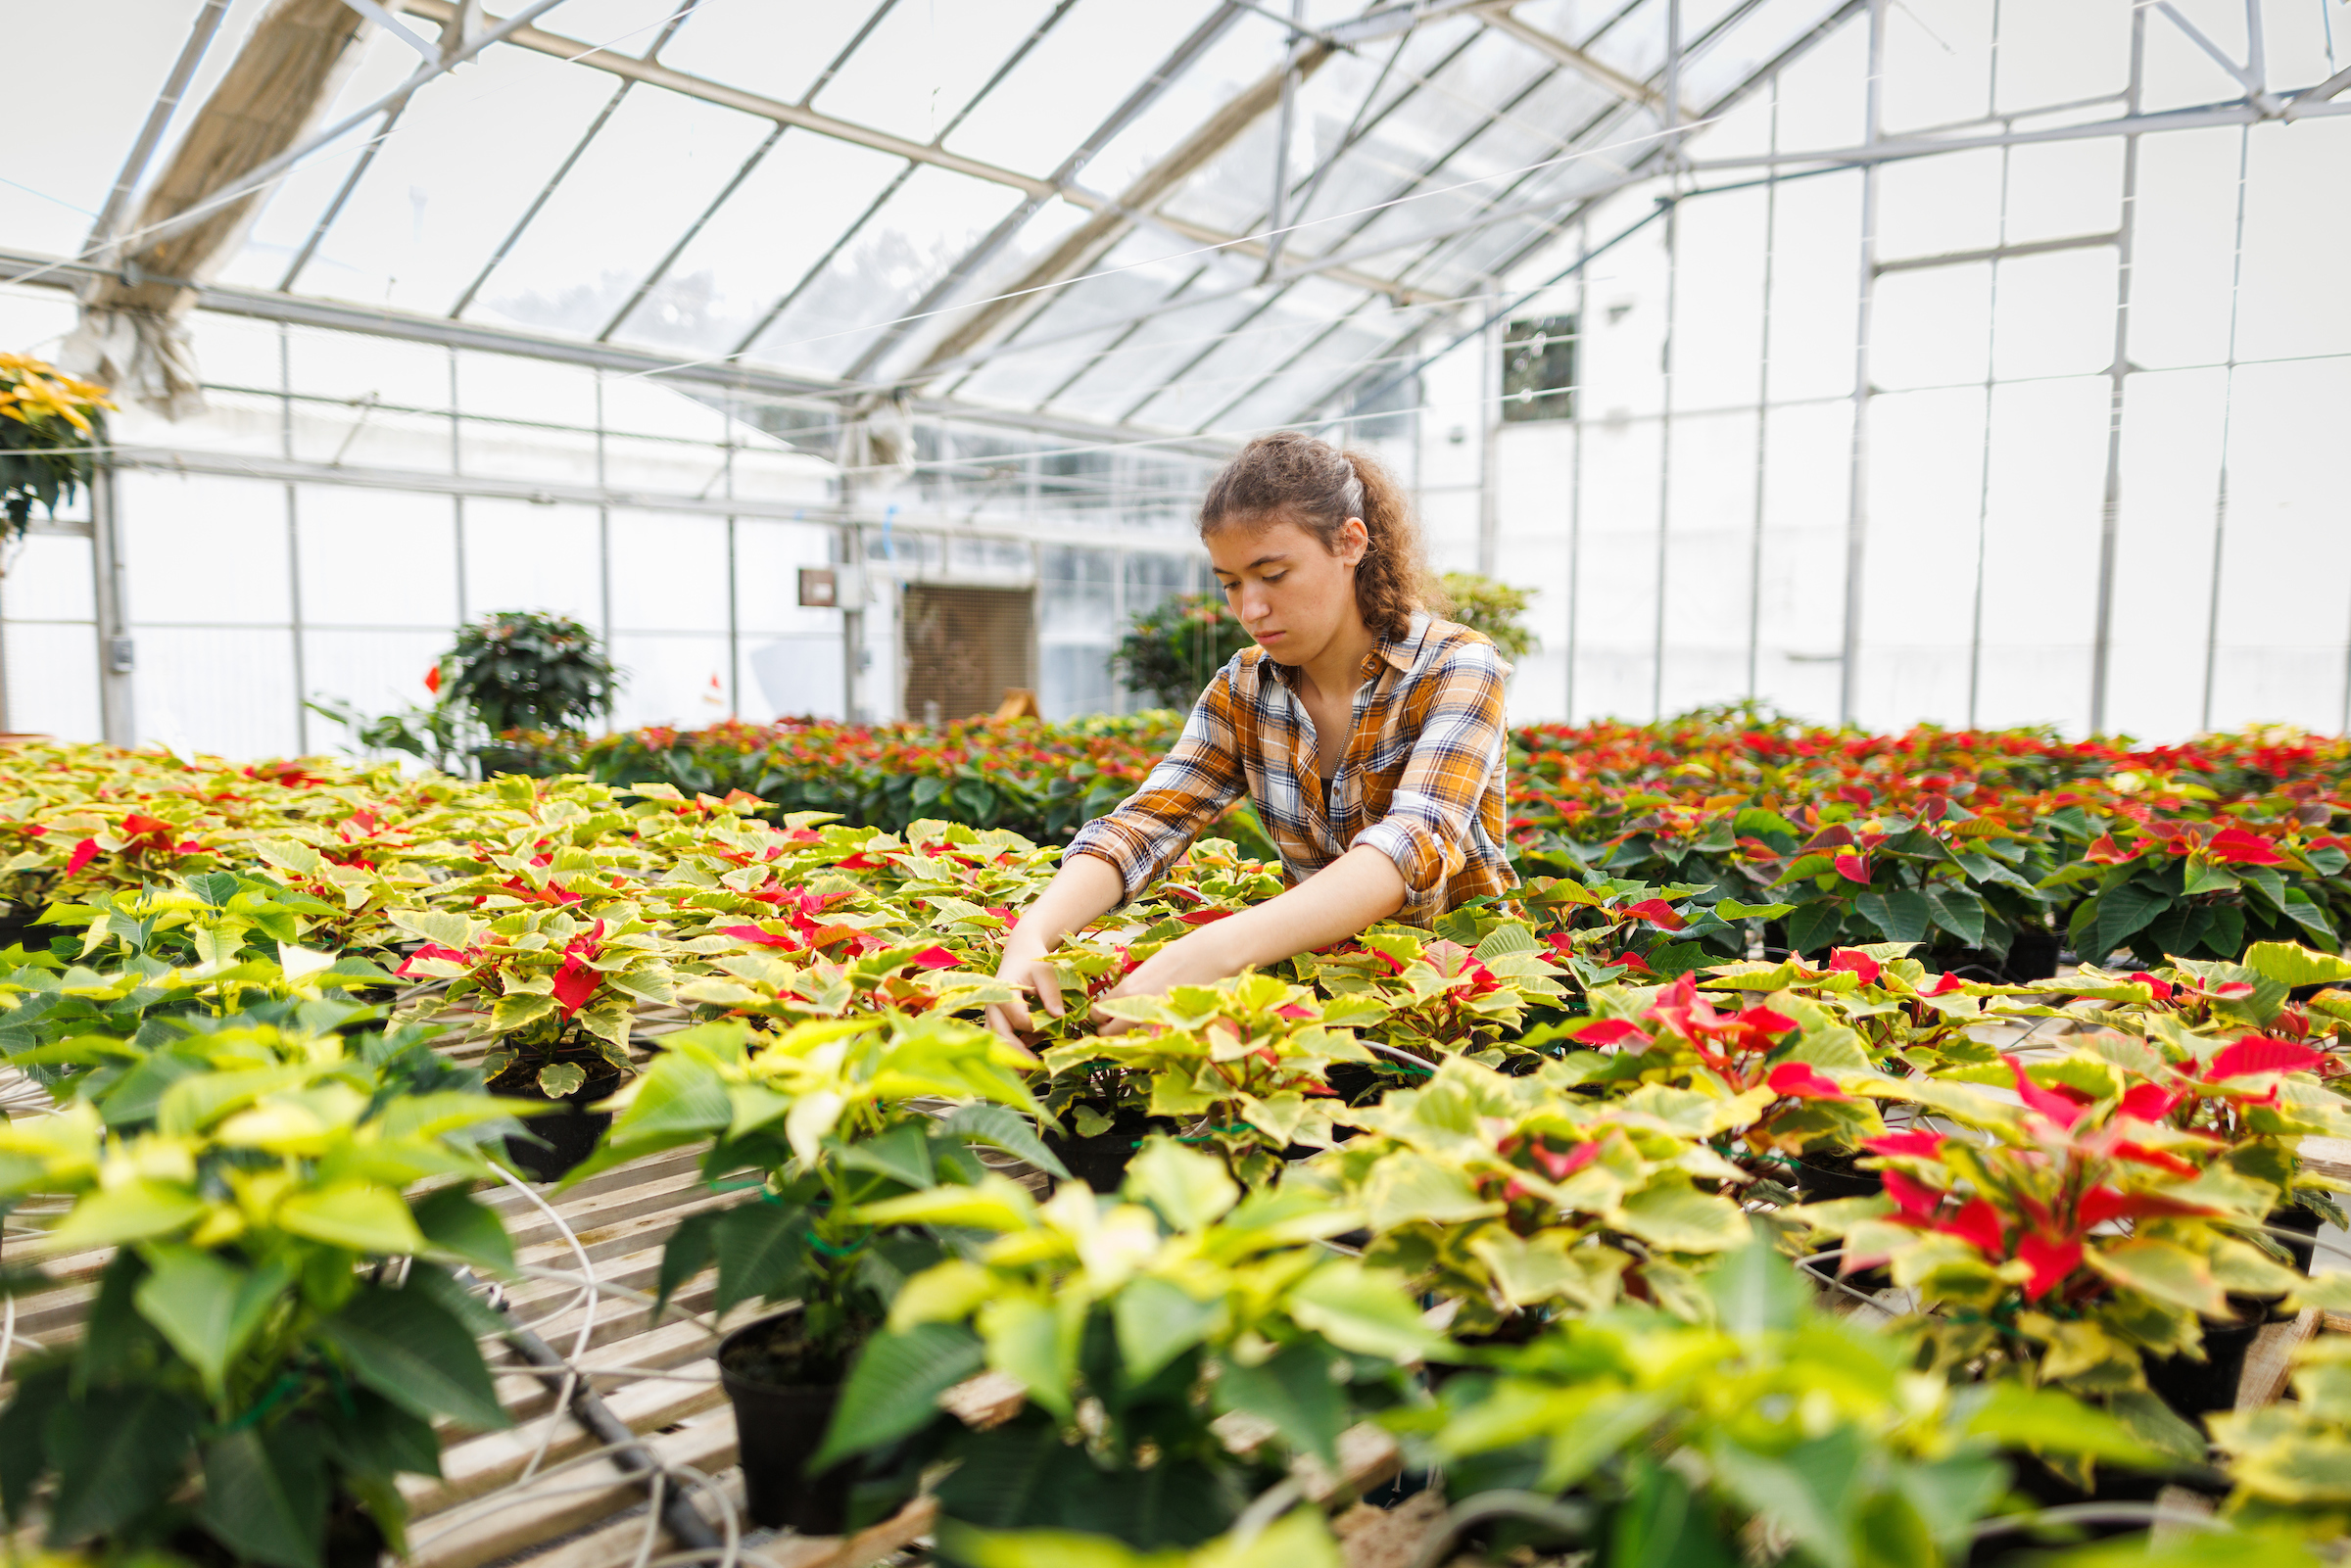 A woman inspects poinsettia flowers in a greenhouse.